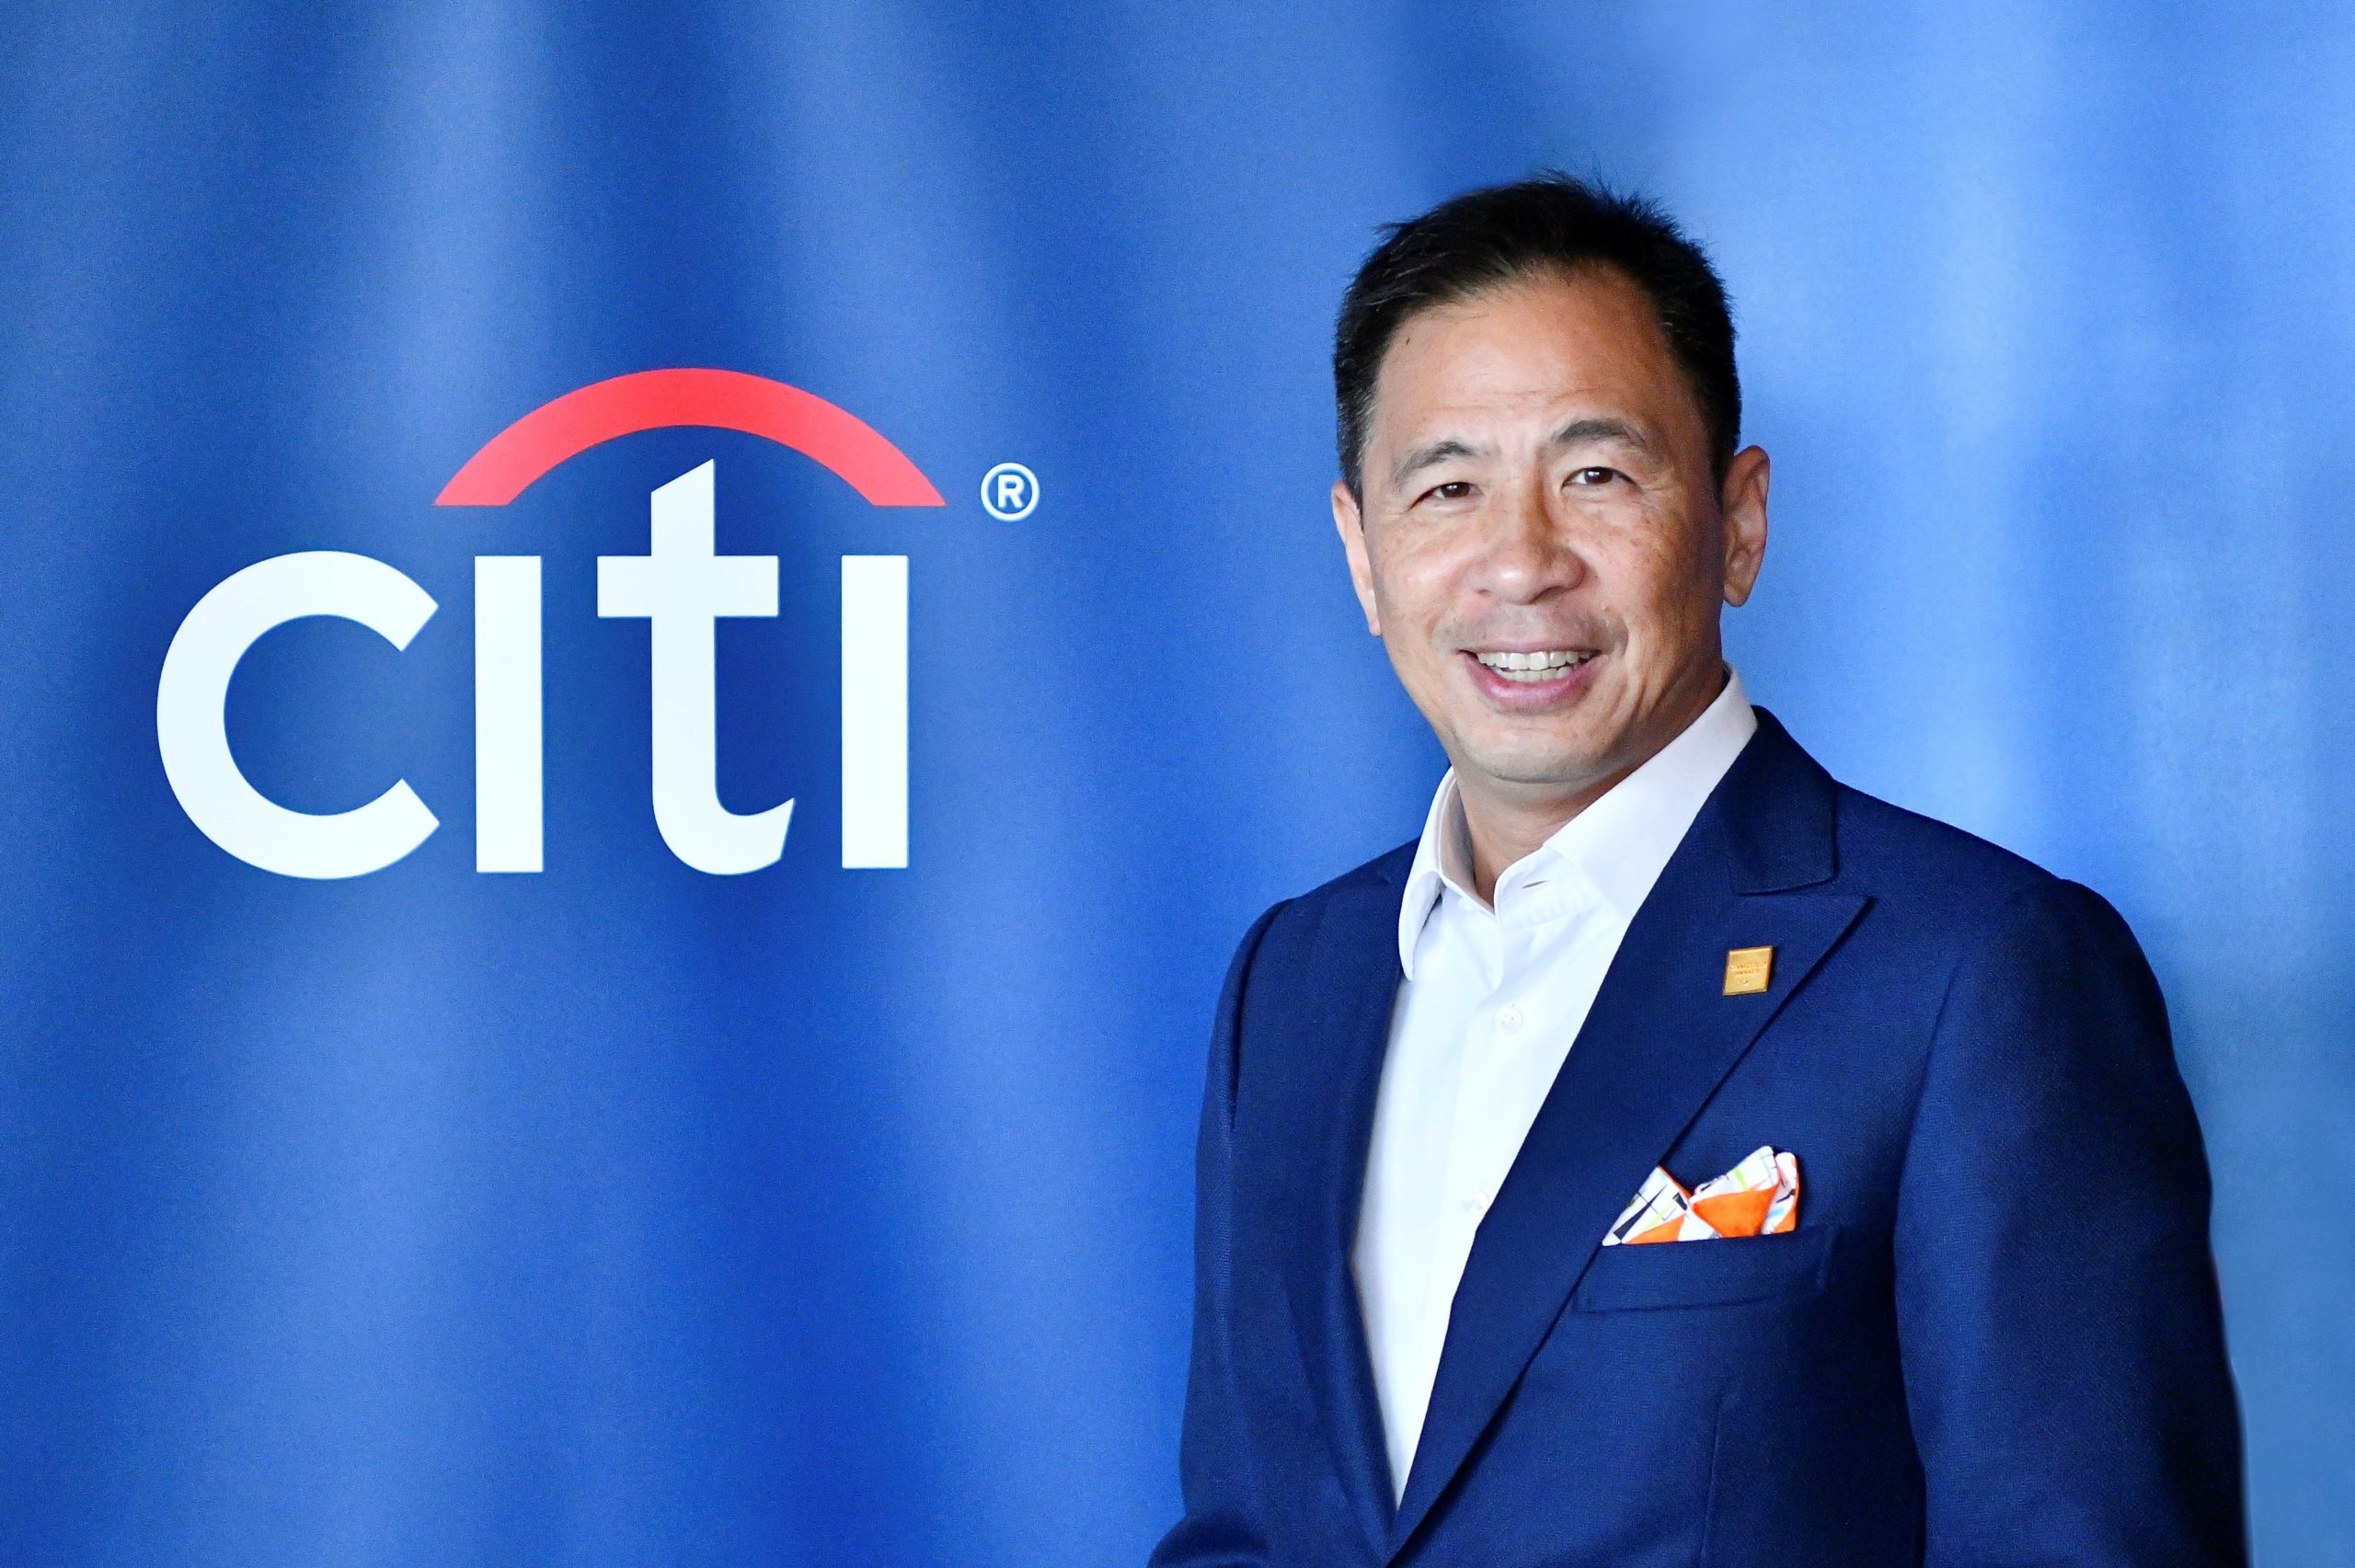 People Digest: Citi Private Bank names South Asia chairman; Carlyle appoints Kewsong Lee as sole CEO